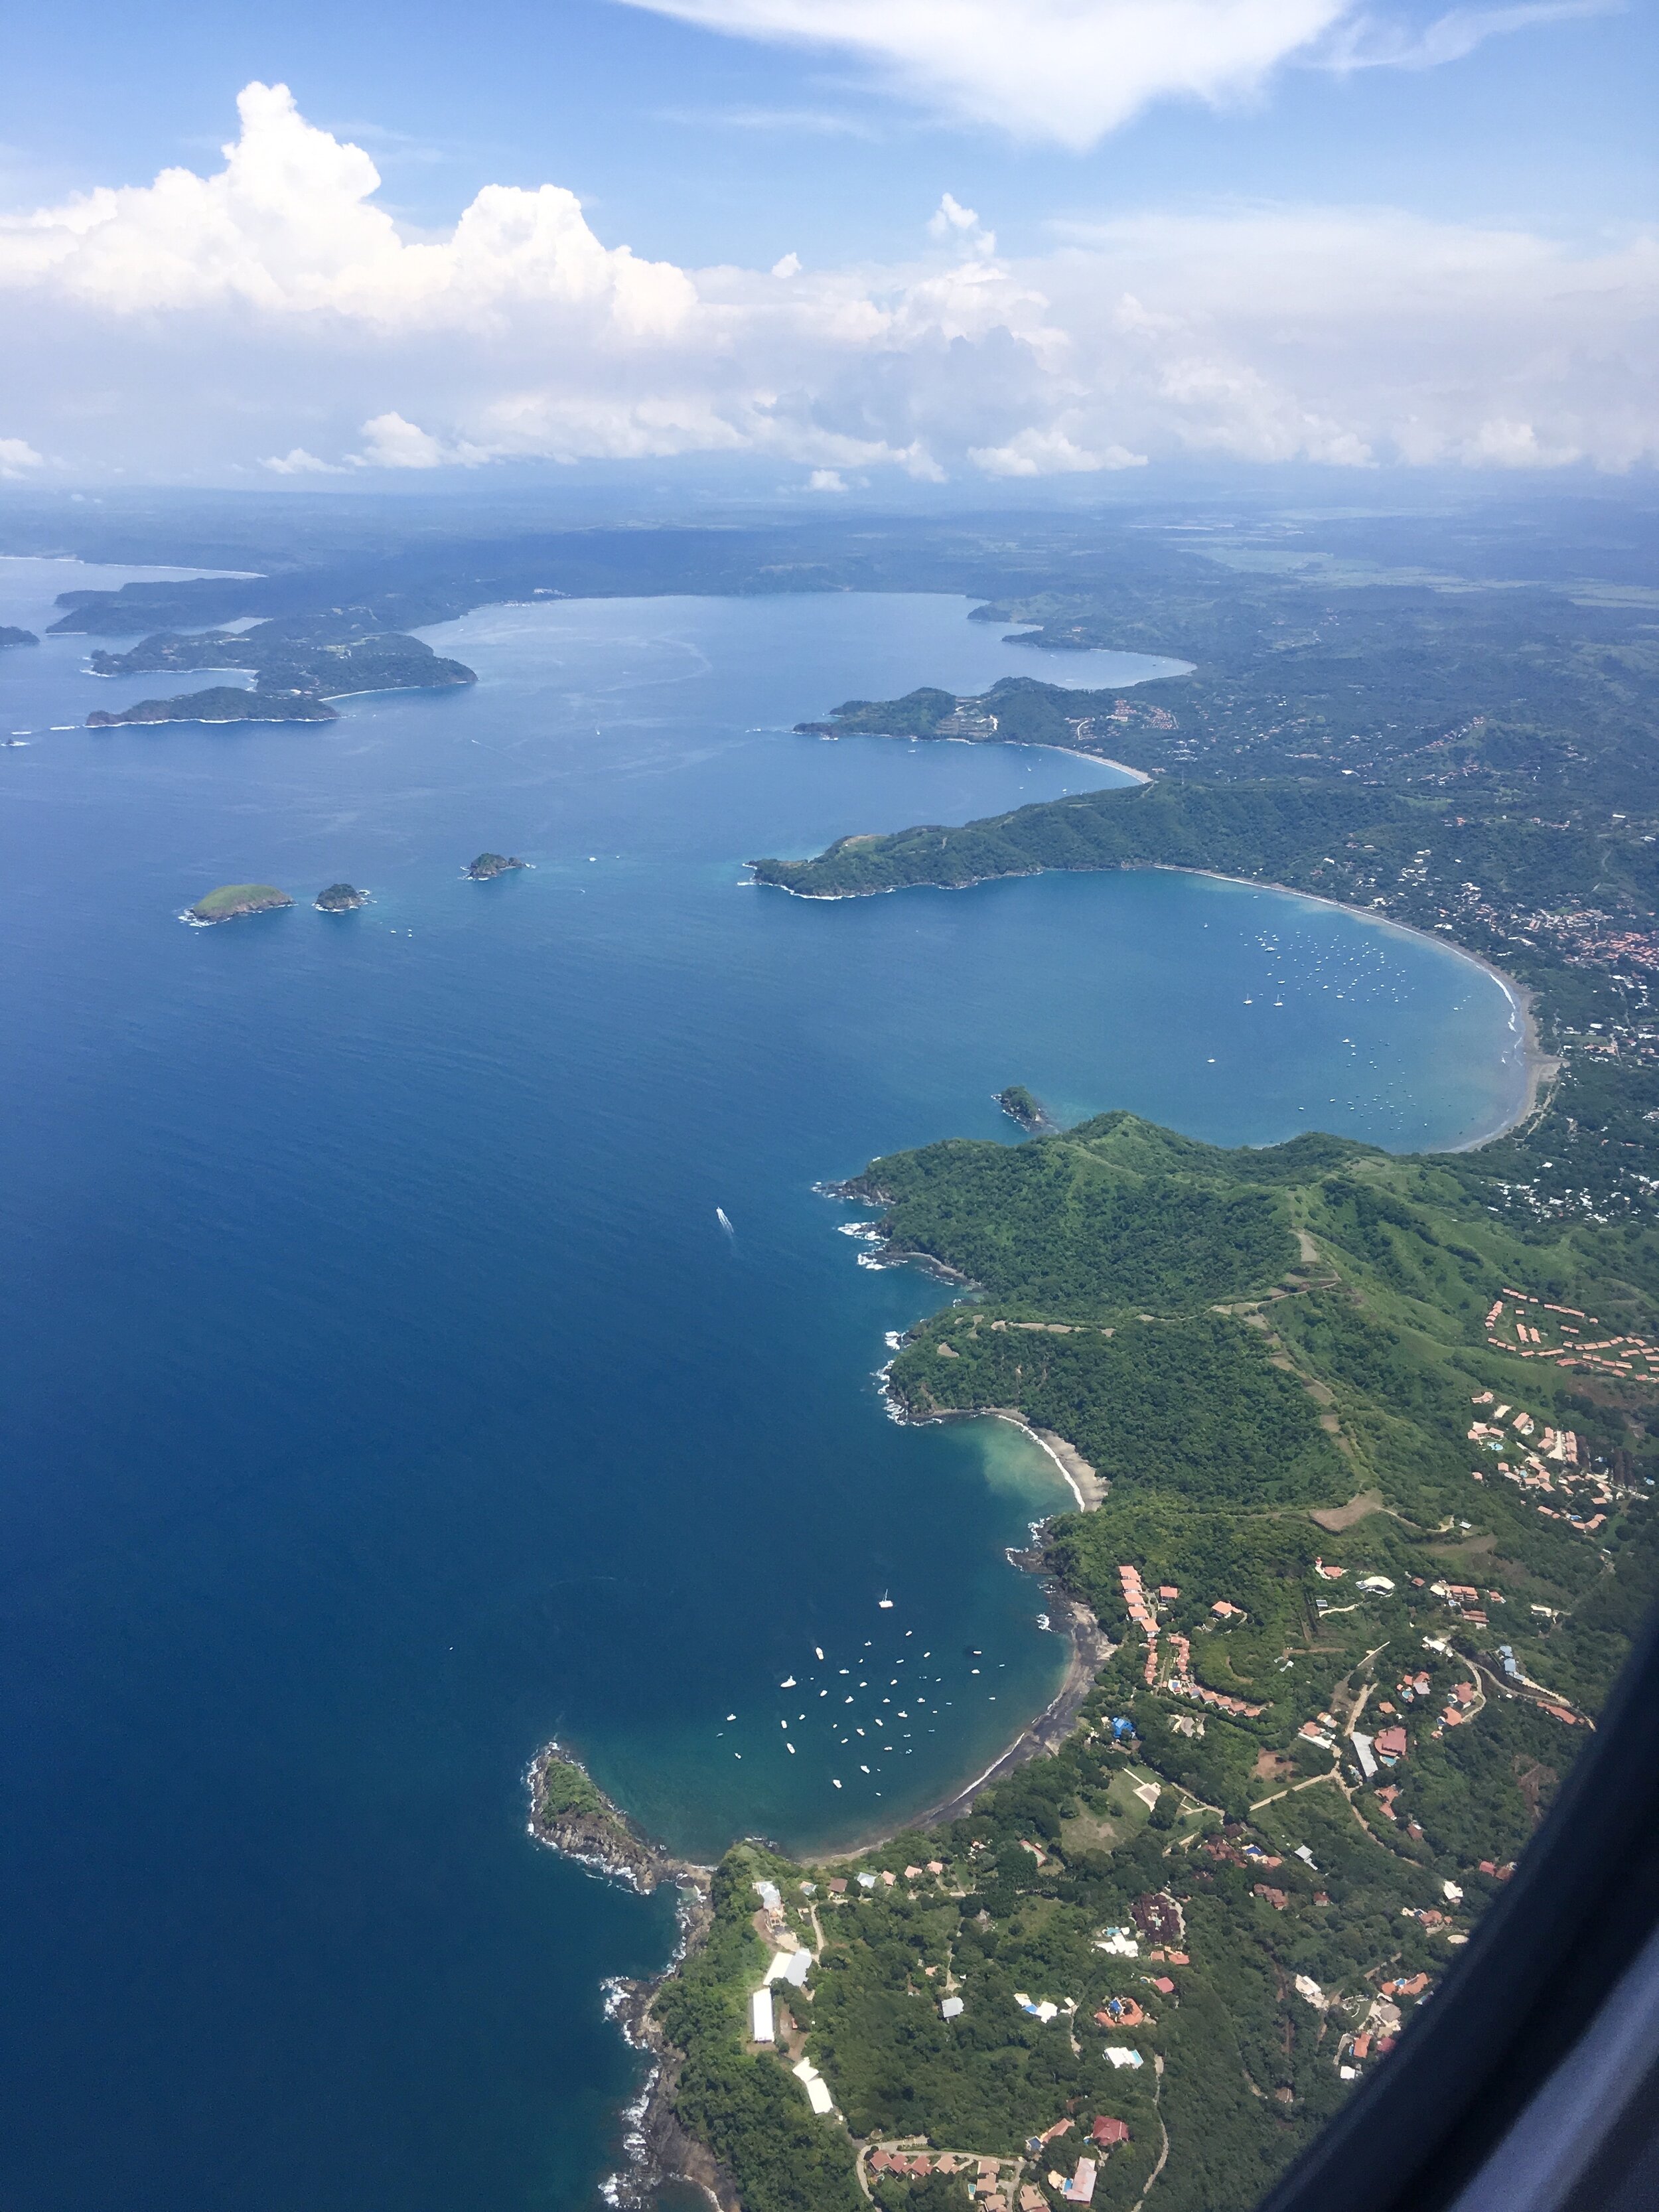 beautiful view from above going back to Costa Rica and how I became a school counselor